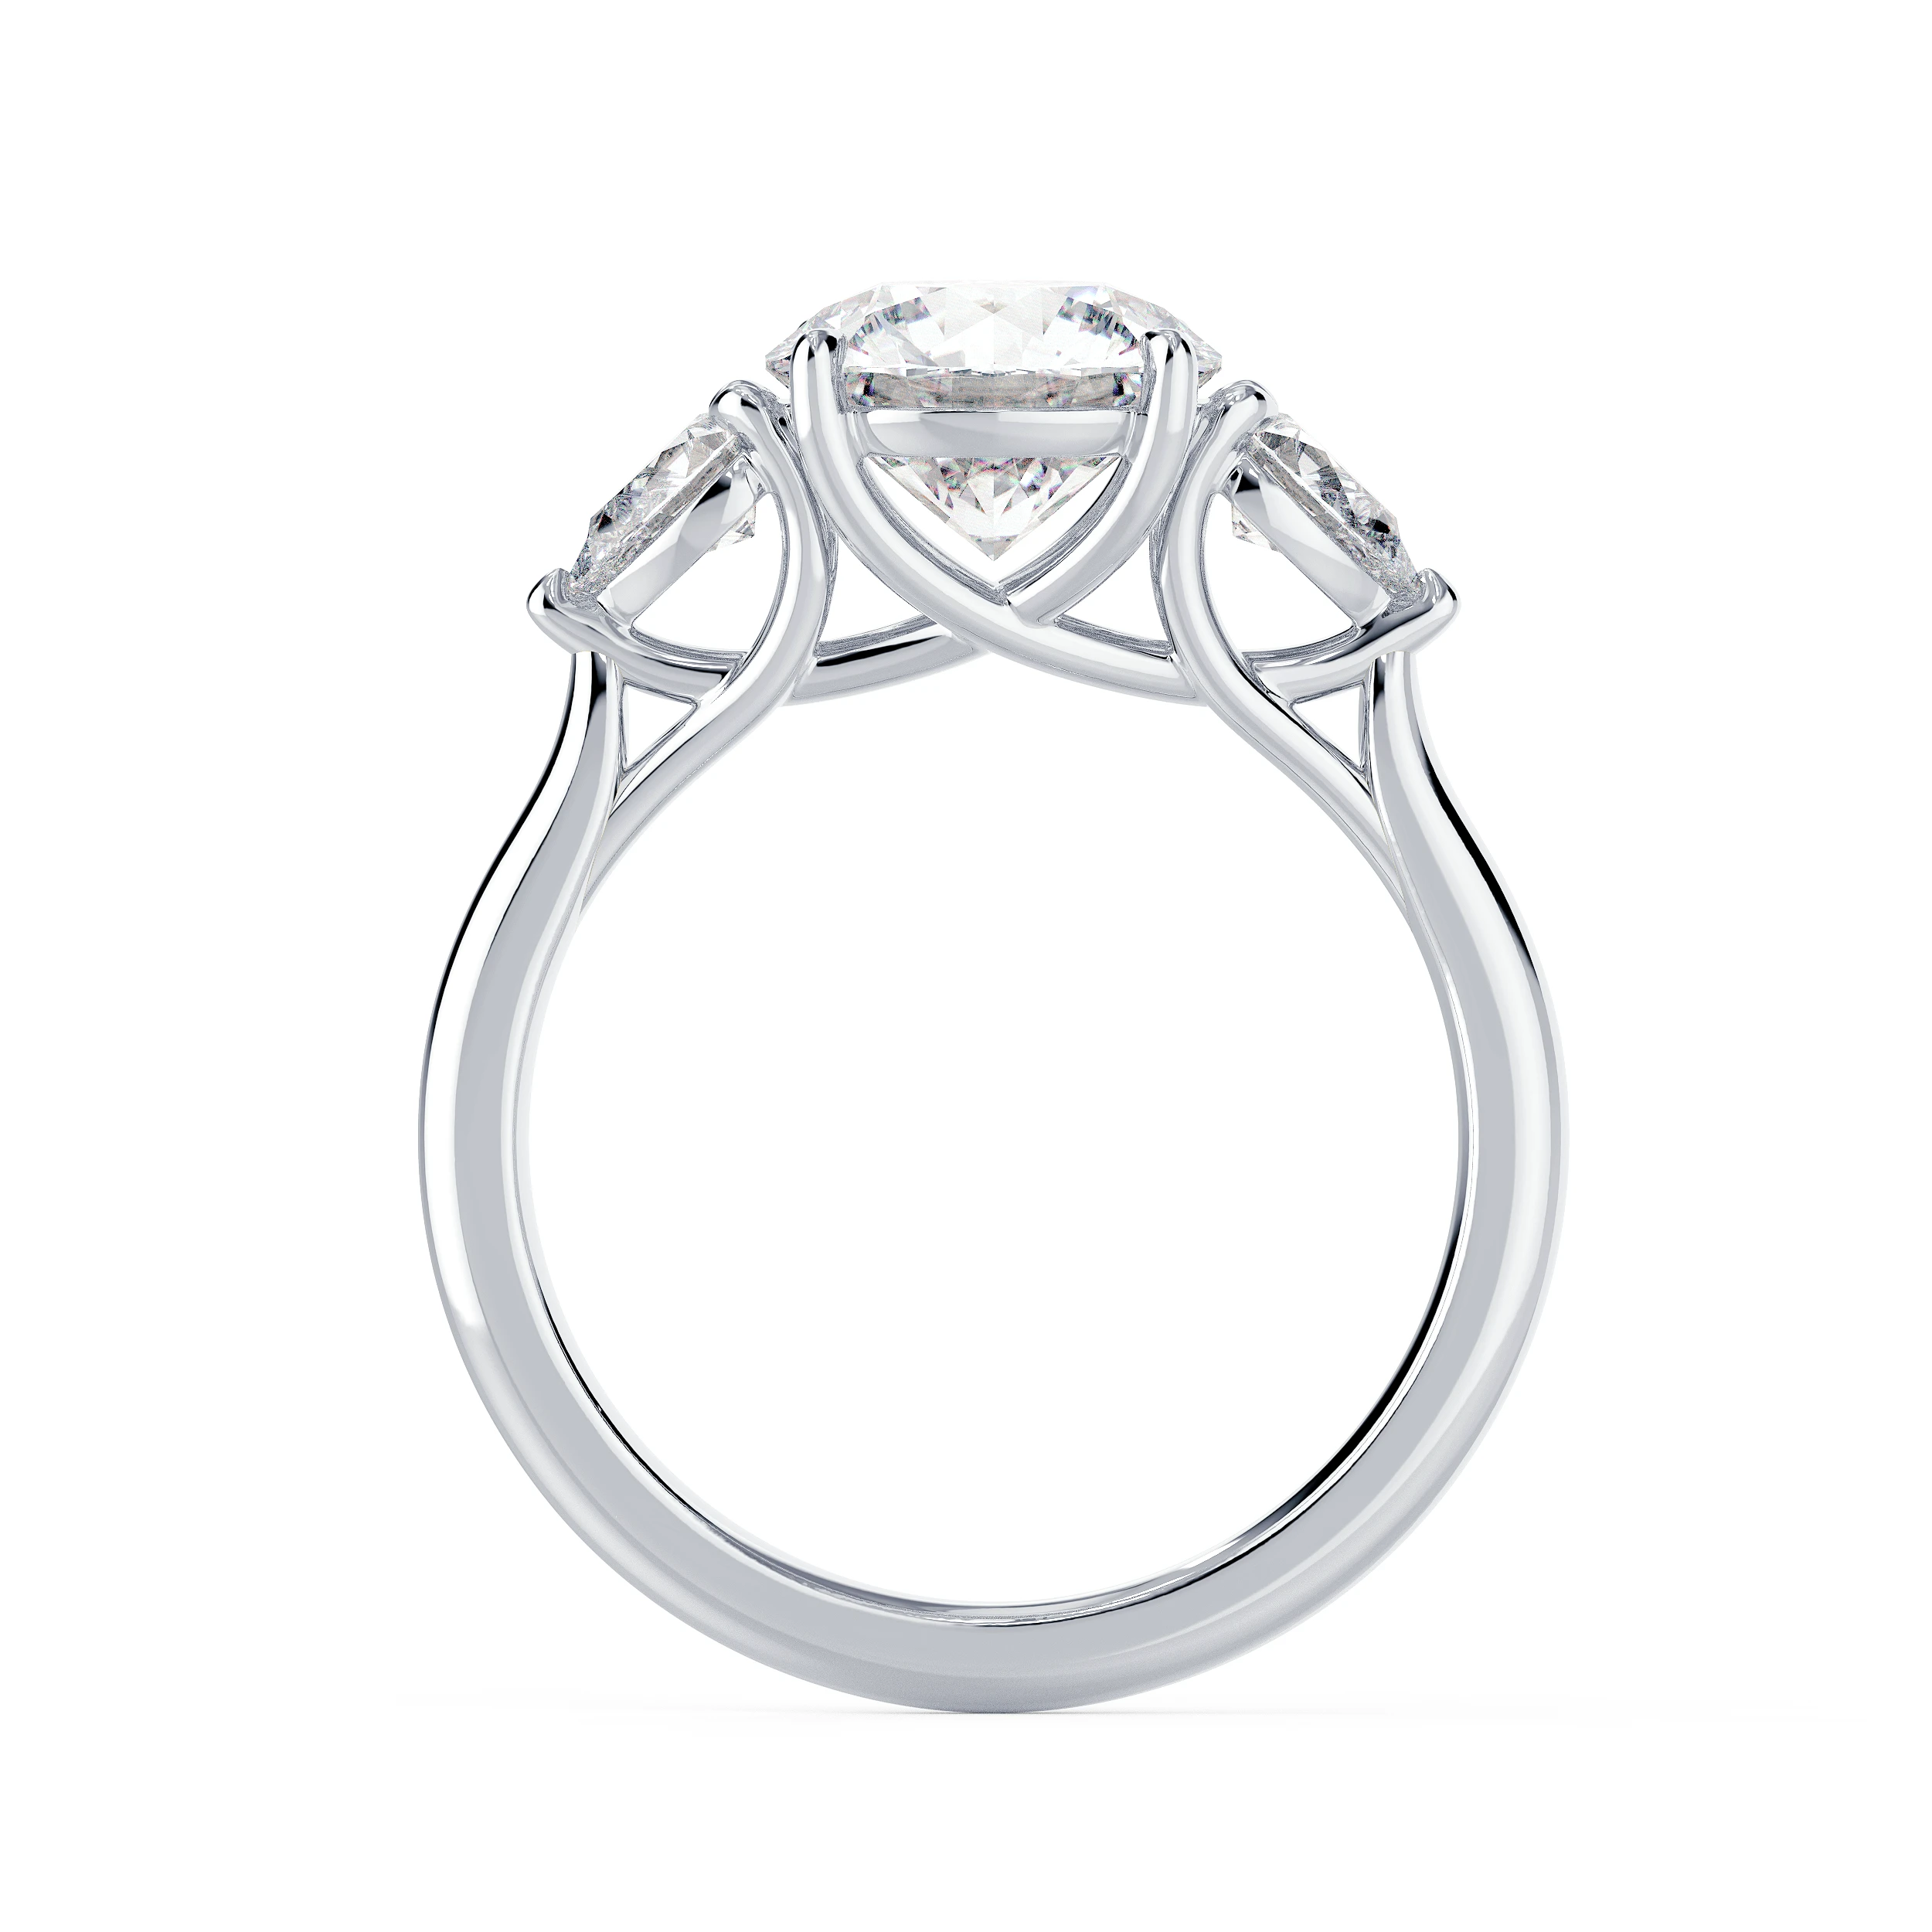 Lab Diamonds set in White Gold Round and Pear Diamond Engagement Ring (Profile View)